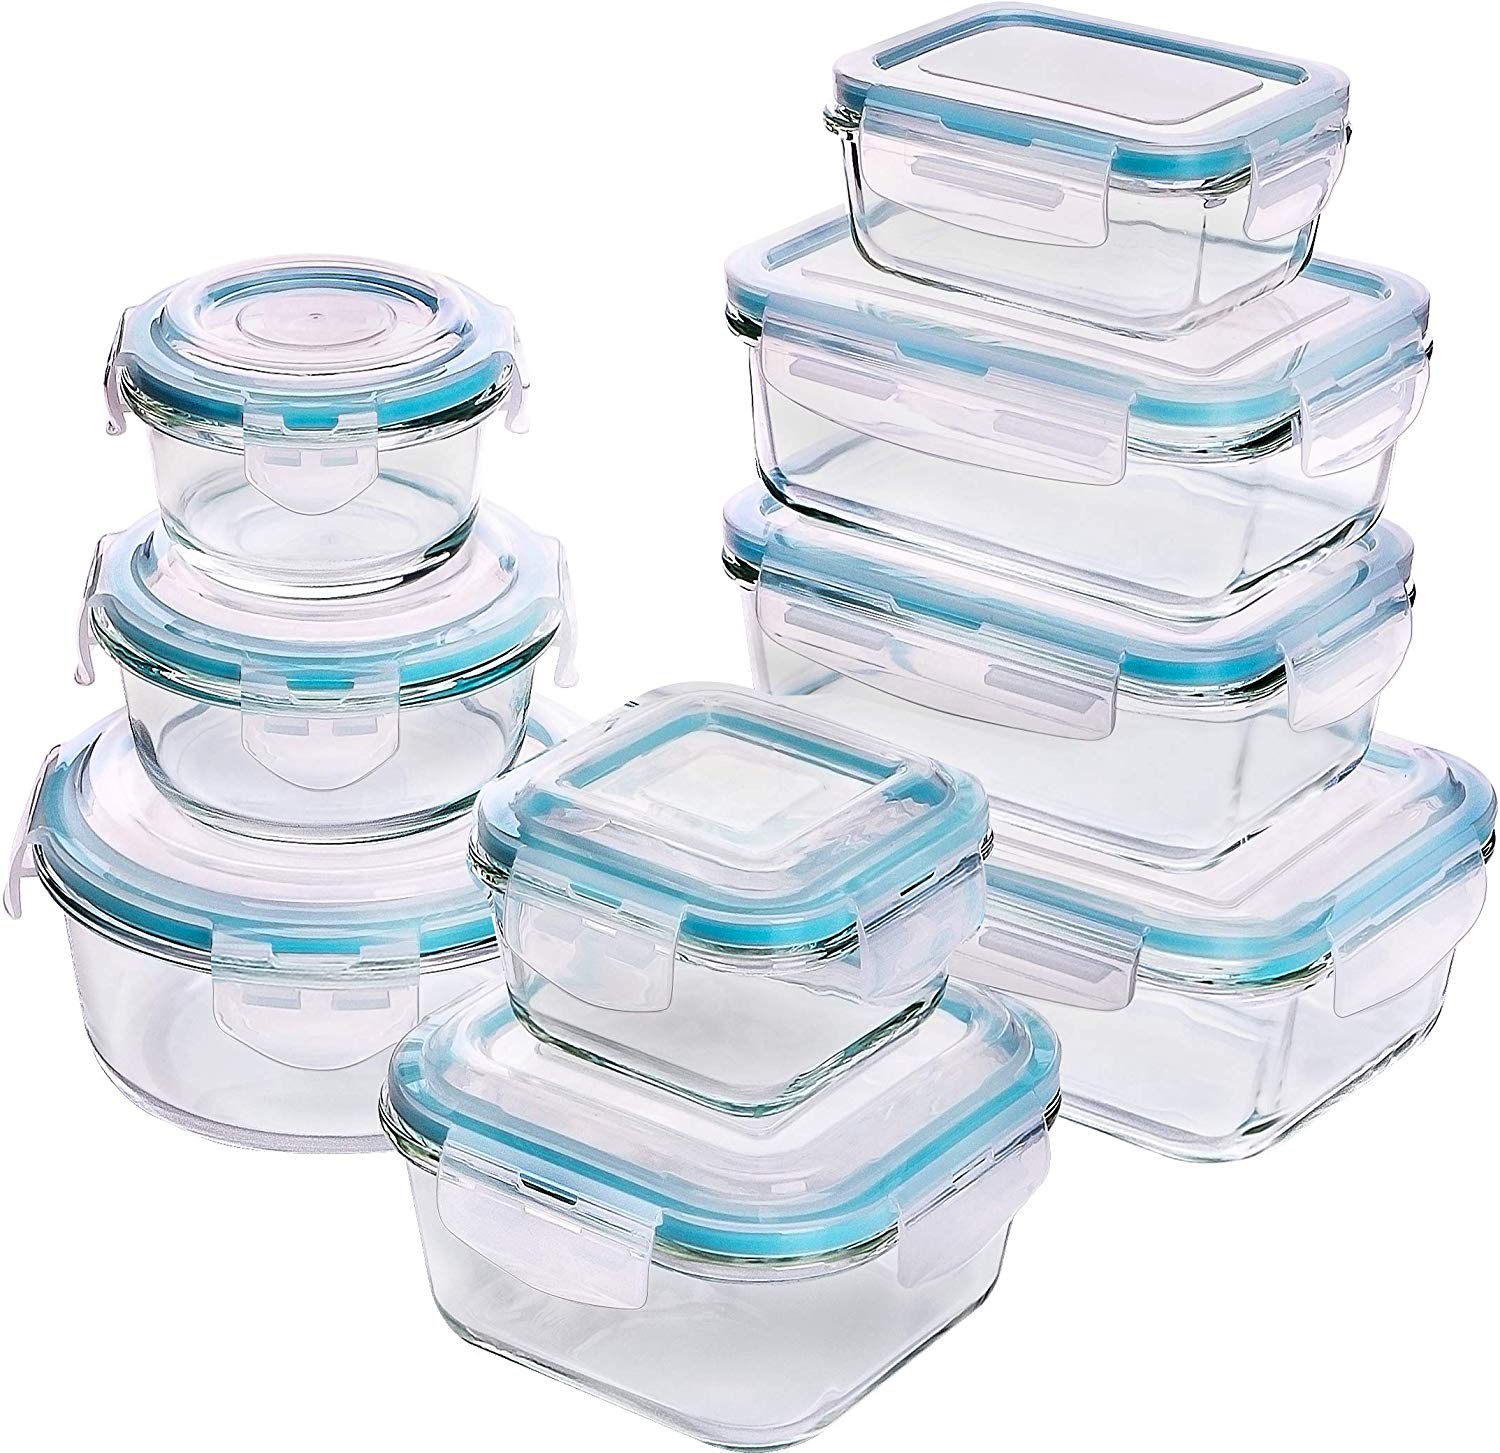 https://cdn.shopify.com/s/files/1/0045/7093/9481/products/UKGLASSCONTAINER18PCTL1.jpg?v=1571128887